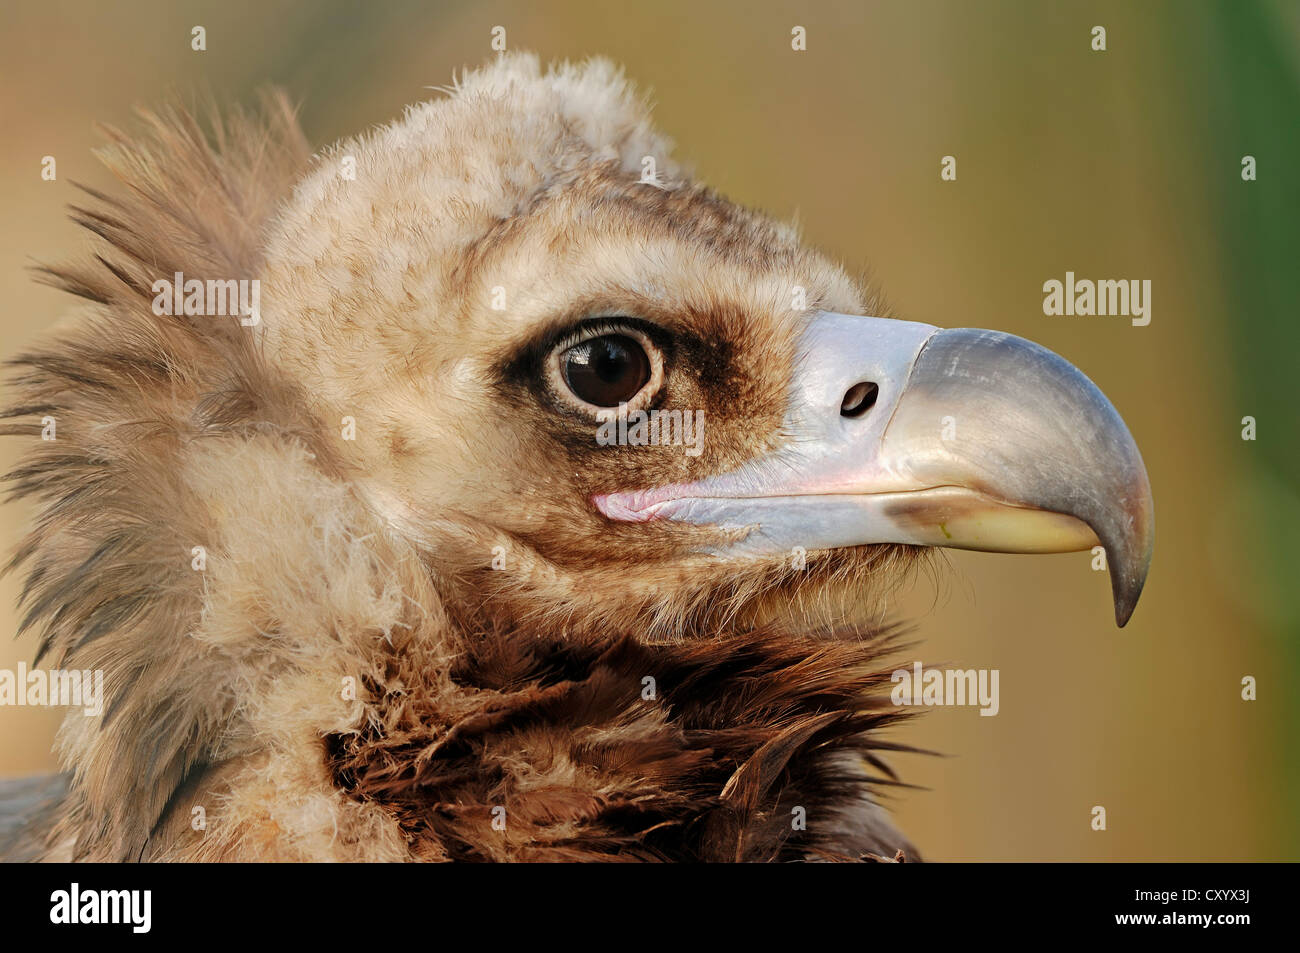 Cinereous vulture (Aegypius monachus), portrait, native to southern Europe and Central Asia, captive, North Rhine-Westphalia Stock Photo